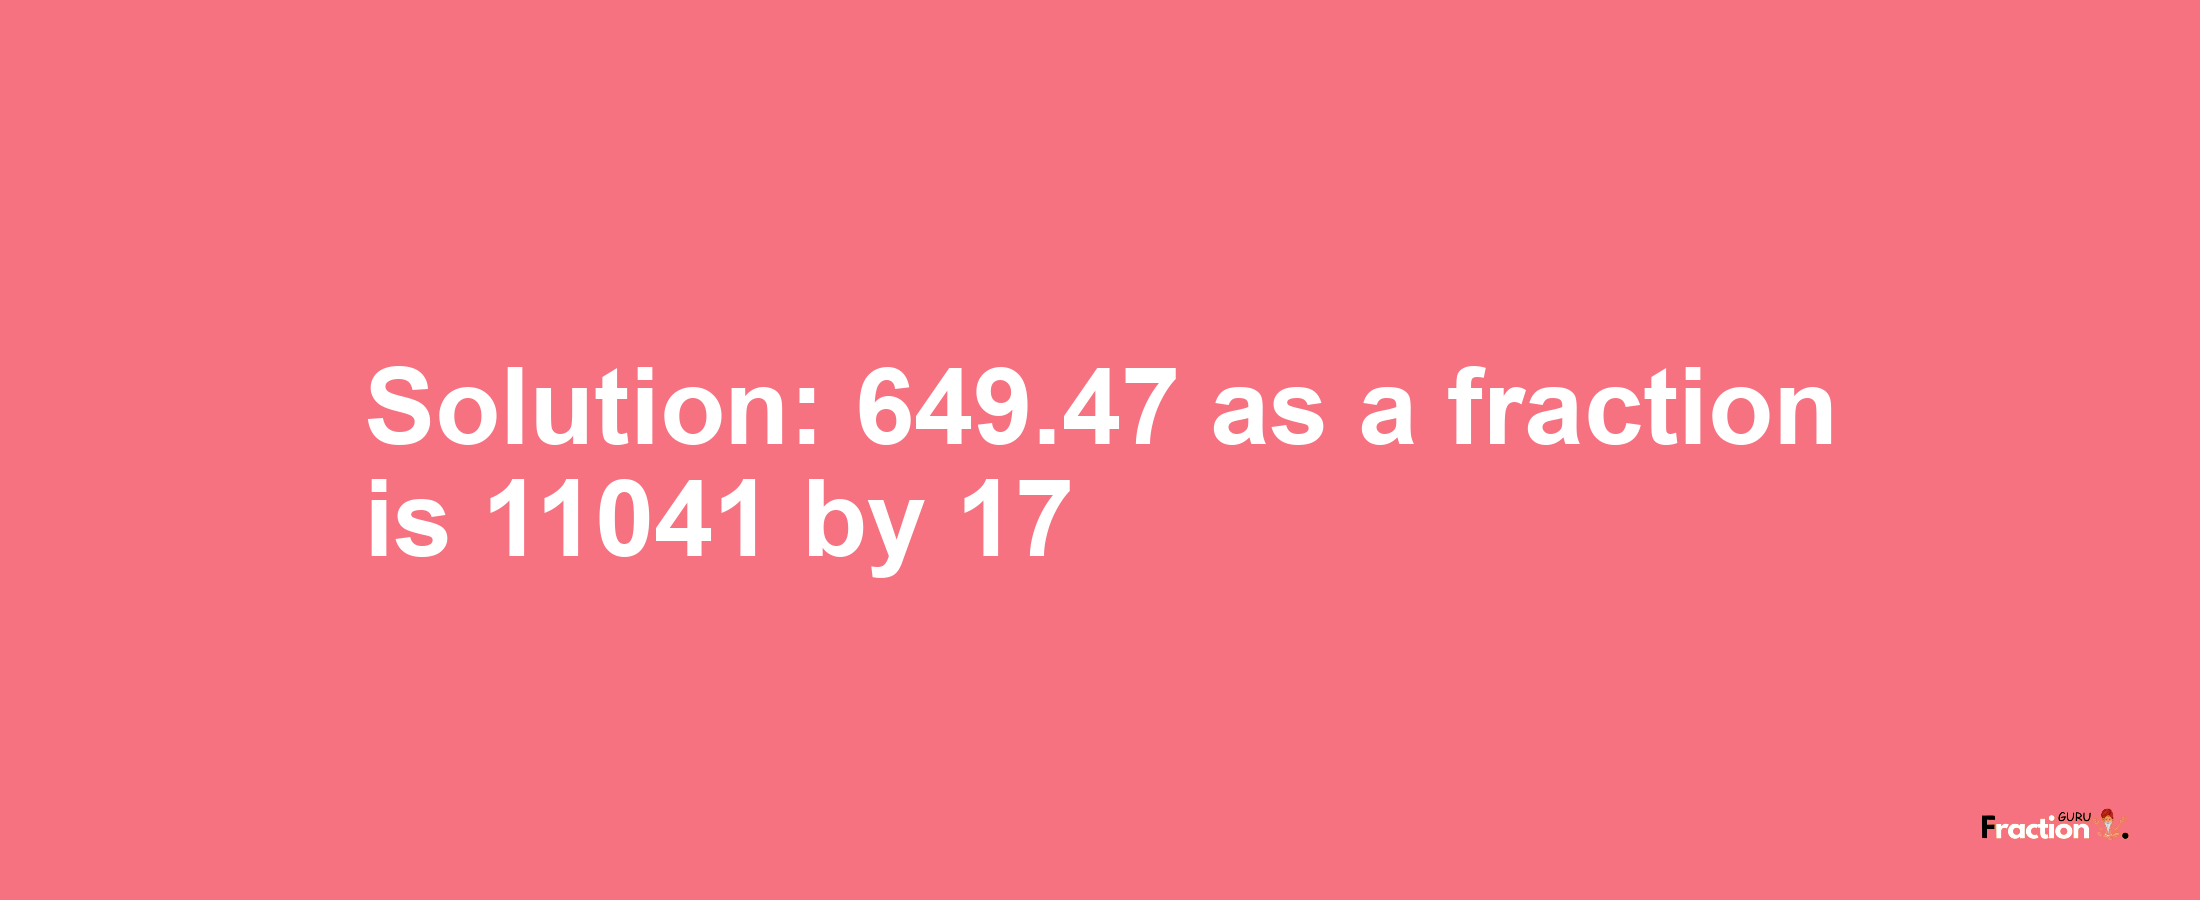 Solution:649.47 as a fraction is 11041/17